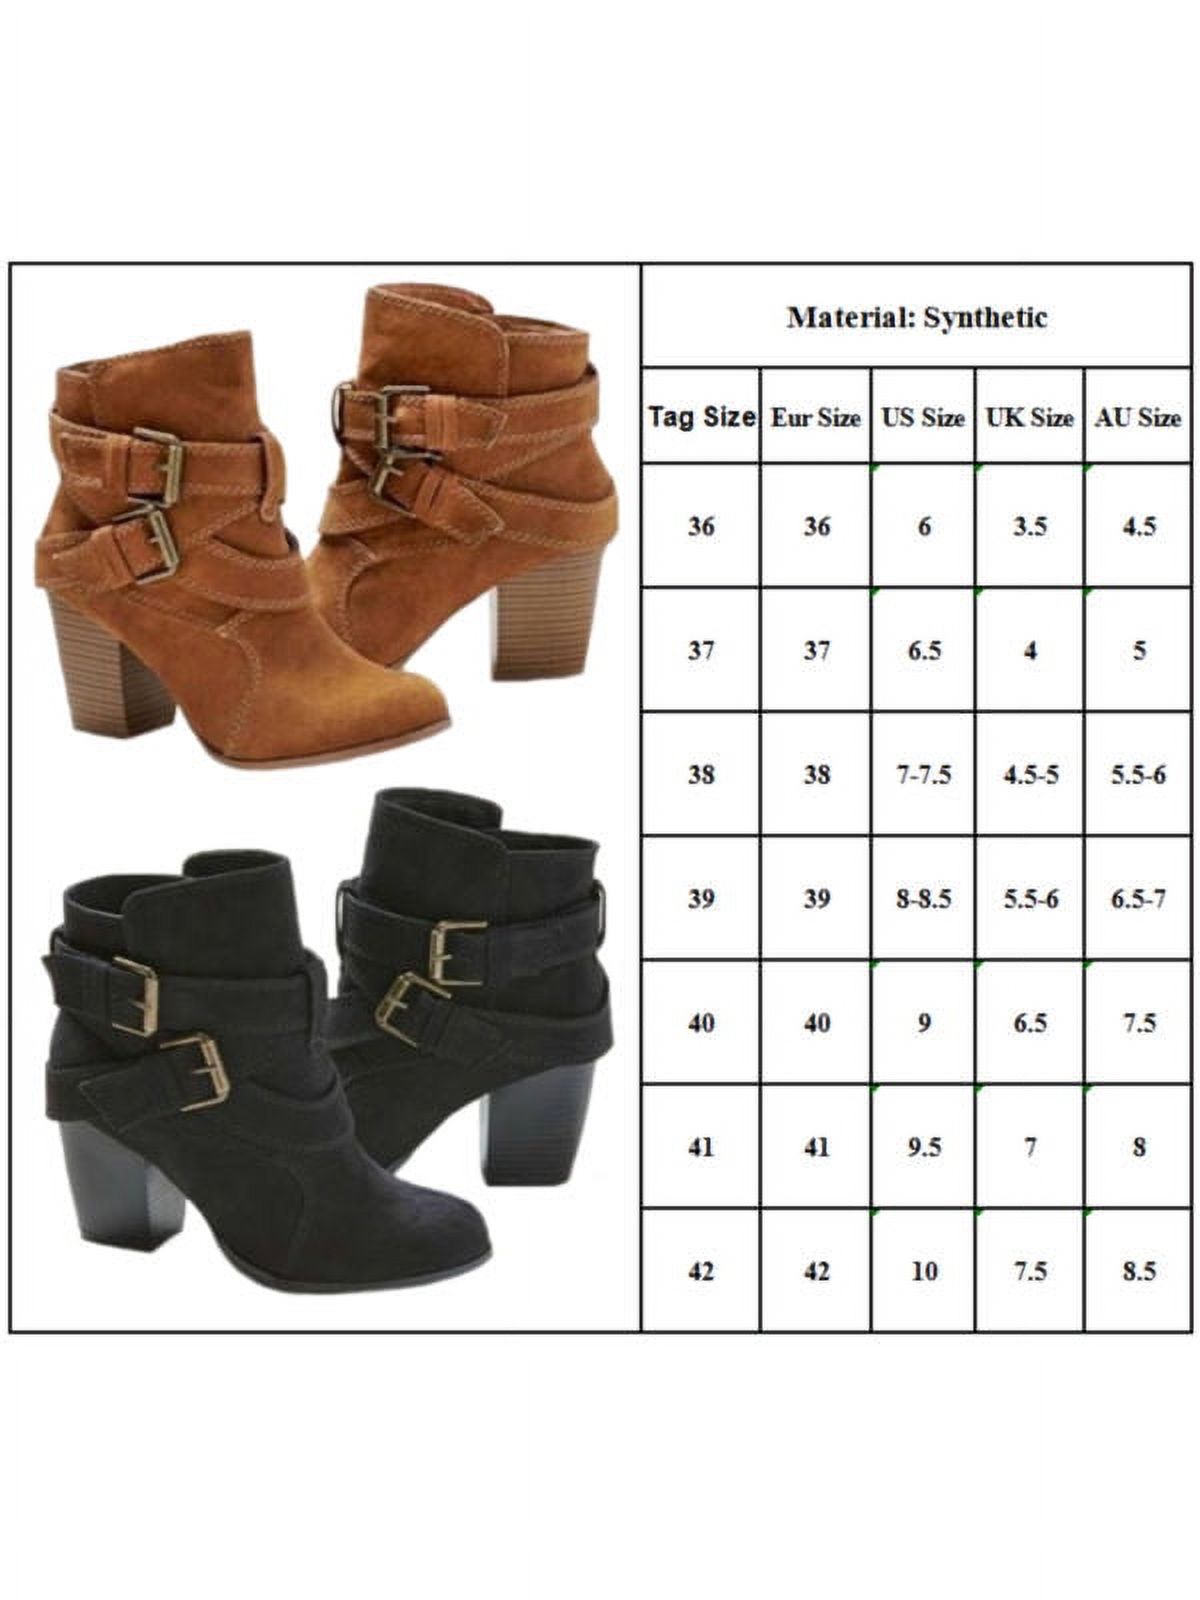 Women's Block High Heel Short Ankle Boots Casual Buckle Martin Booties Shoes - image 2 of 2